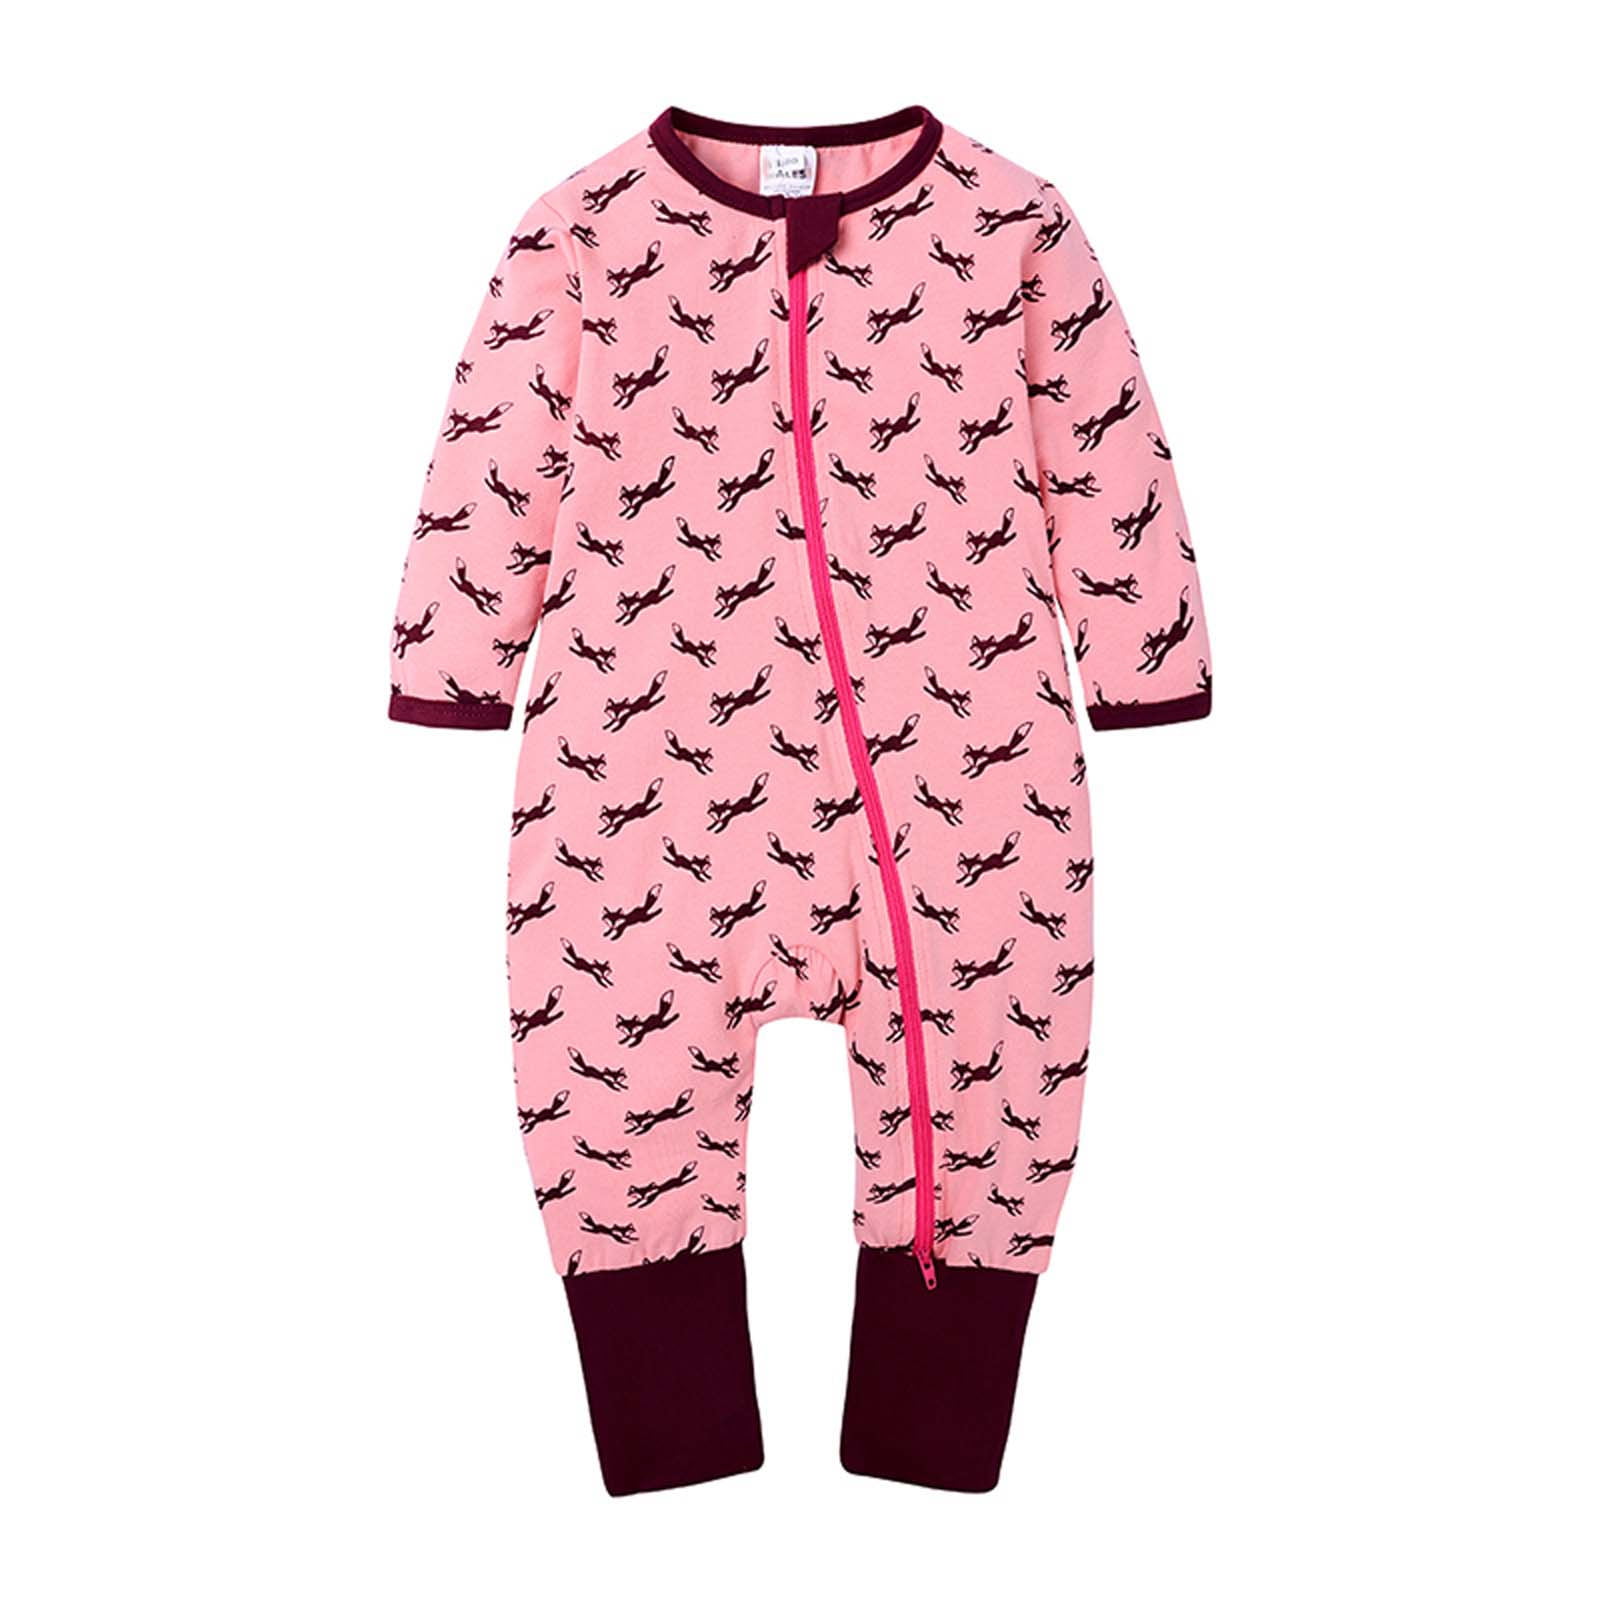 Infant Baby Boy Girl Long Sleeve Cartoon Print Romper Jumpsuit Clothes Outfits / 